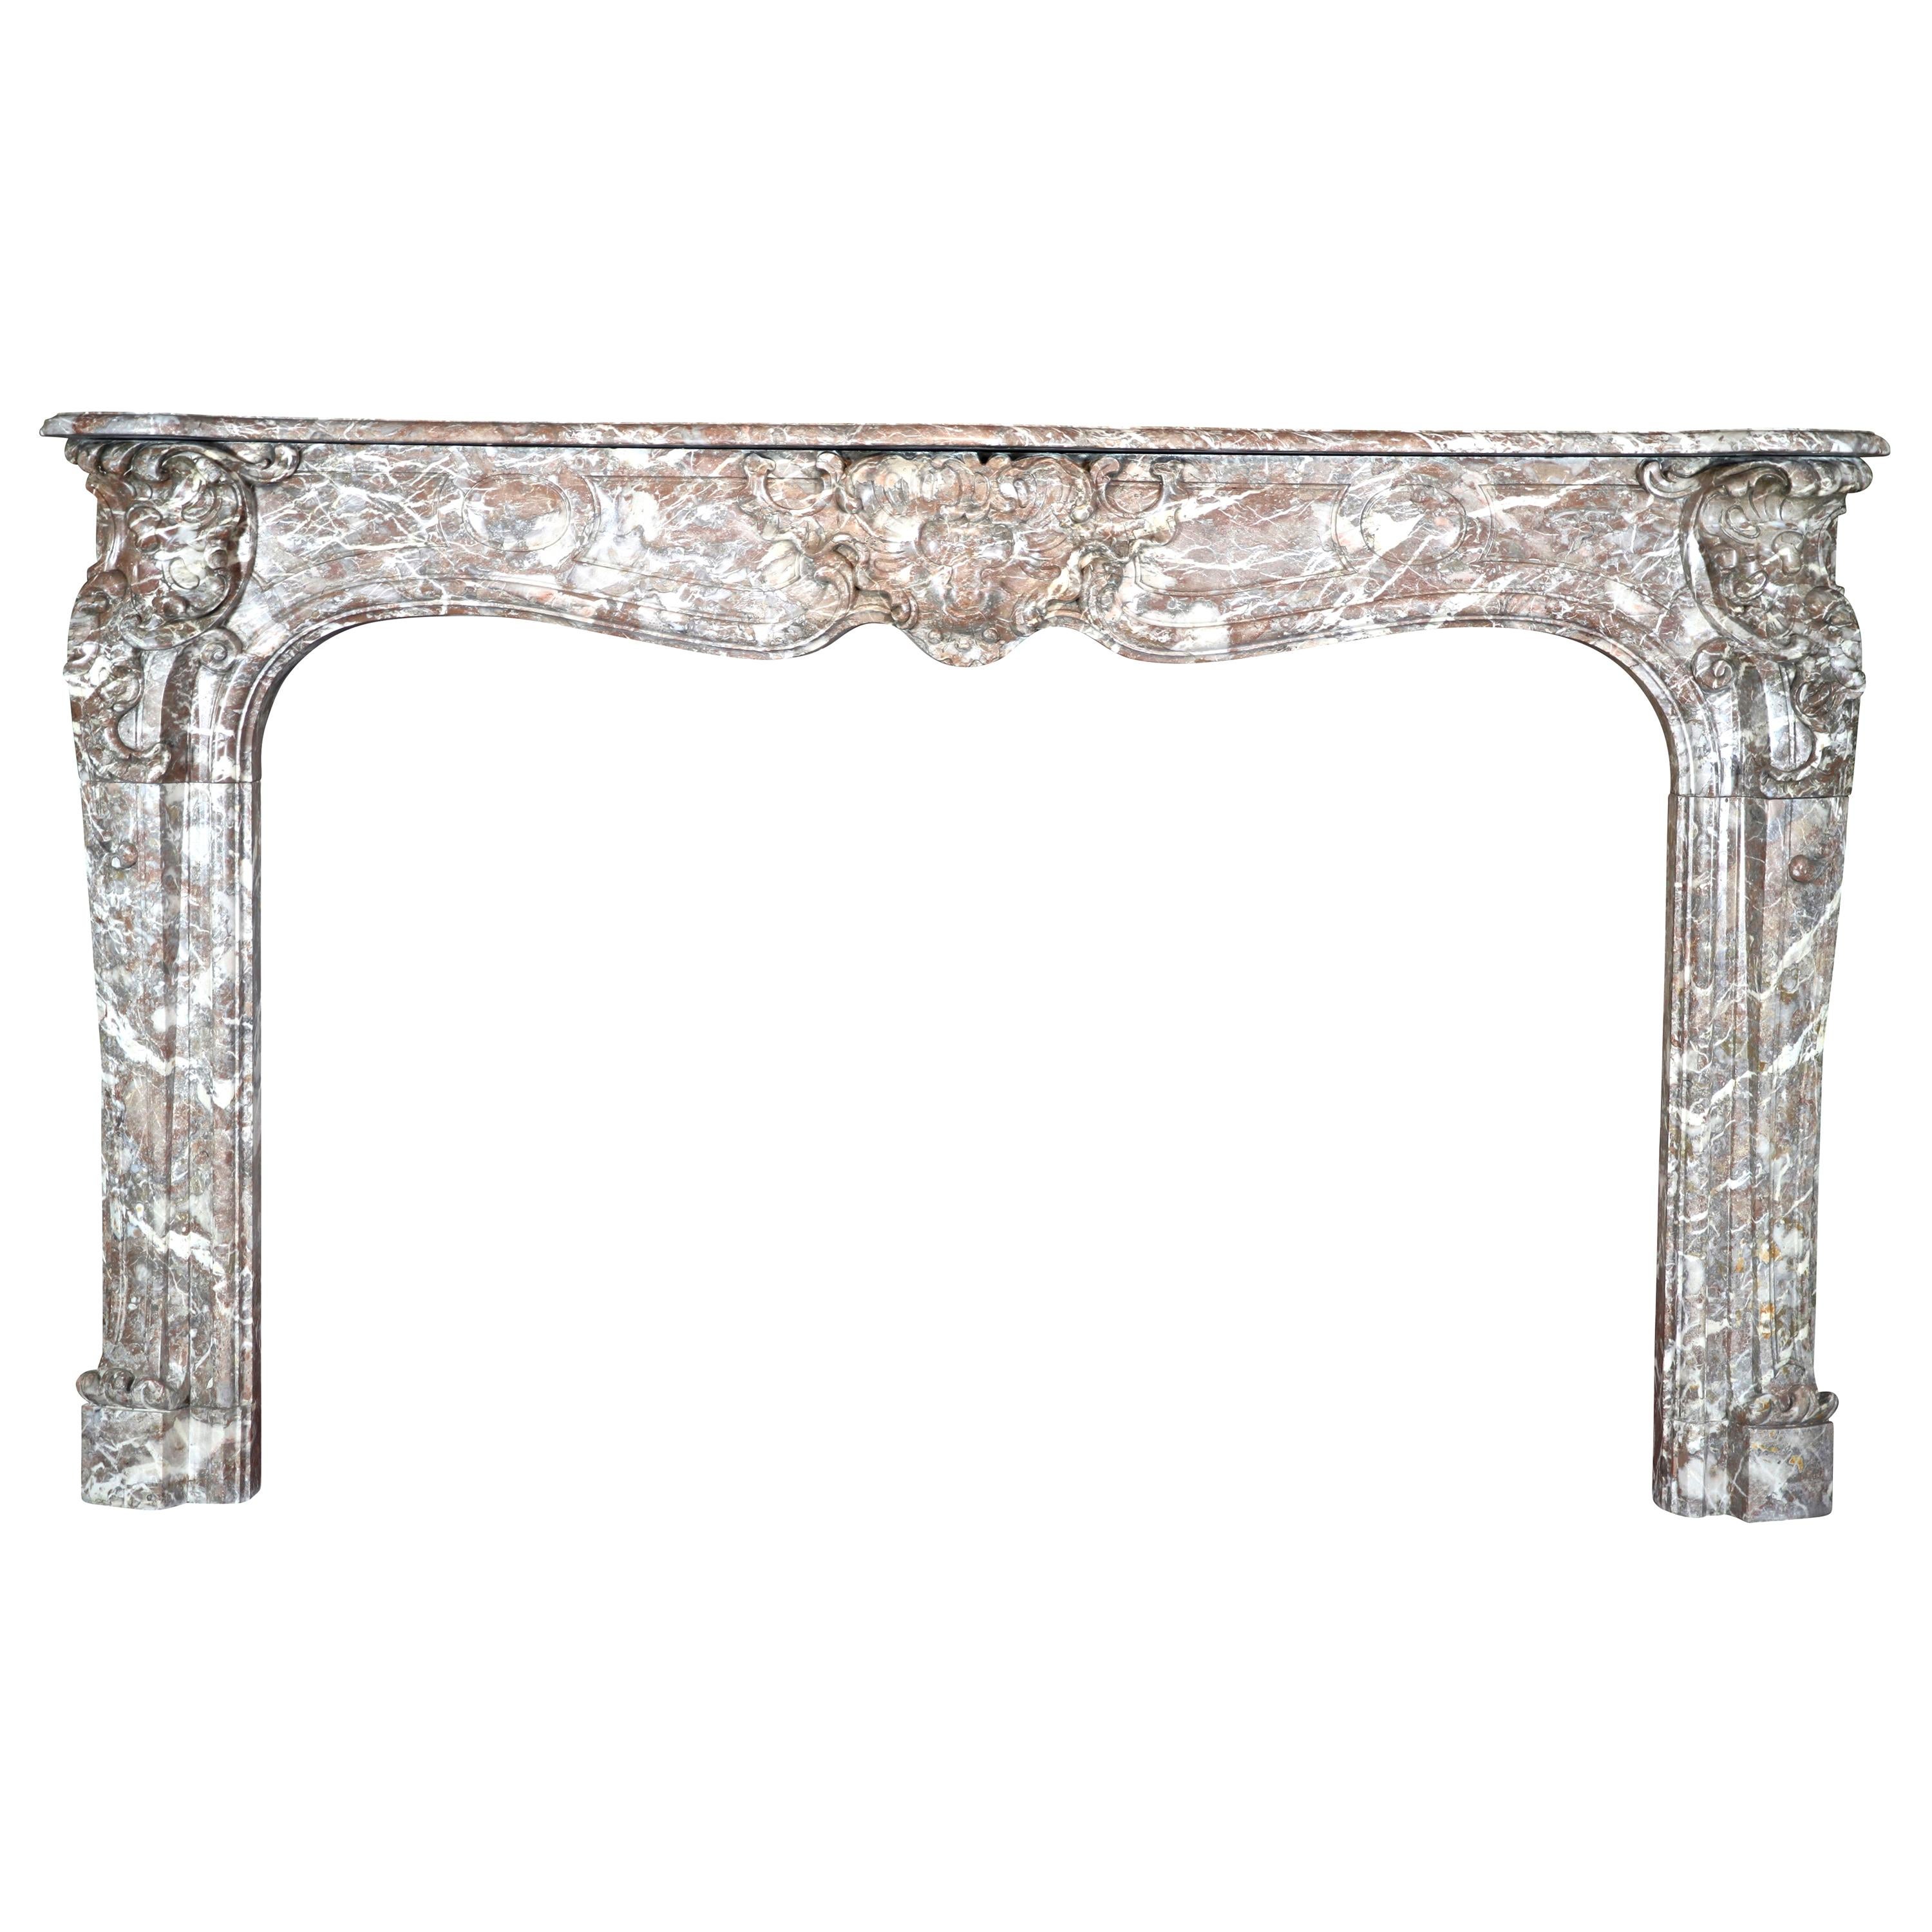 18th Century, Regency Grand Classic Antique Marble Fireplace Surround For Sale